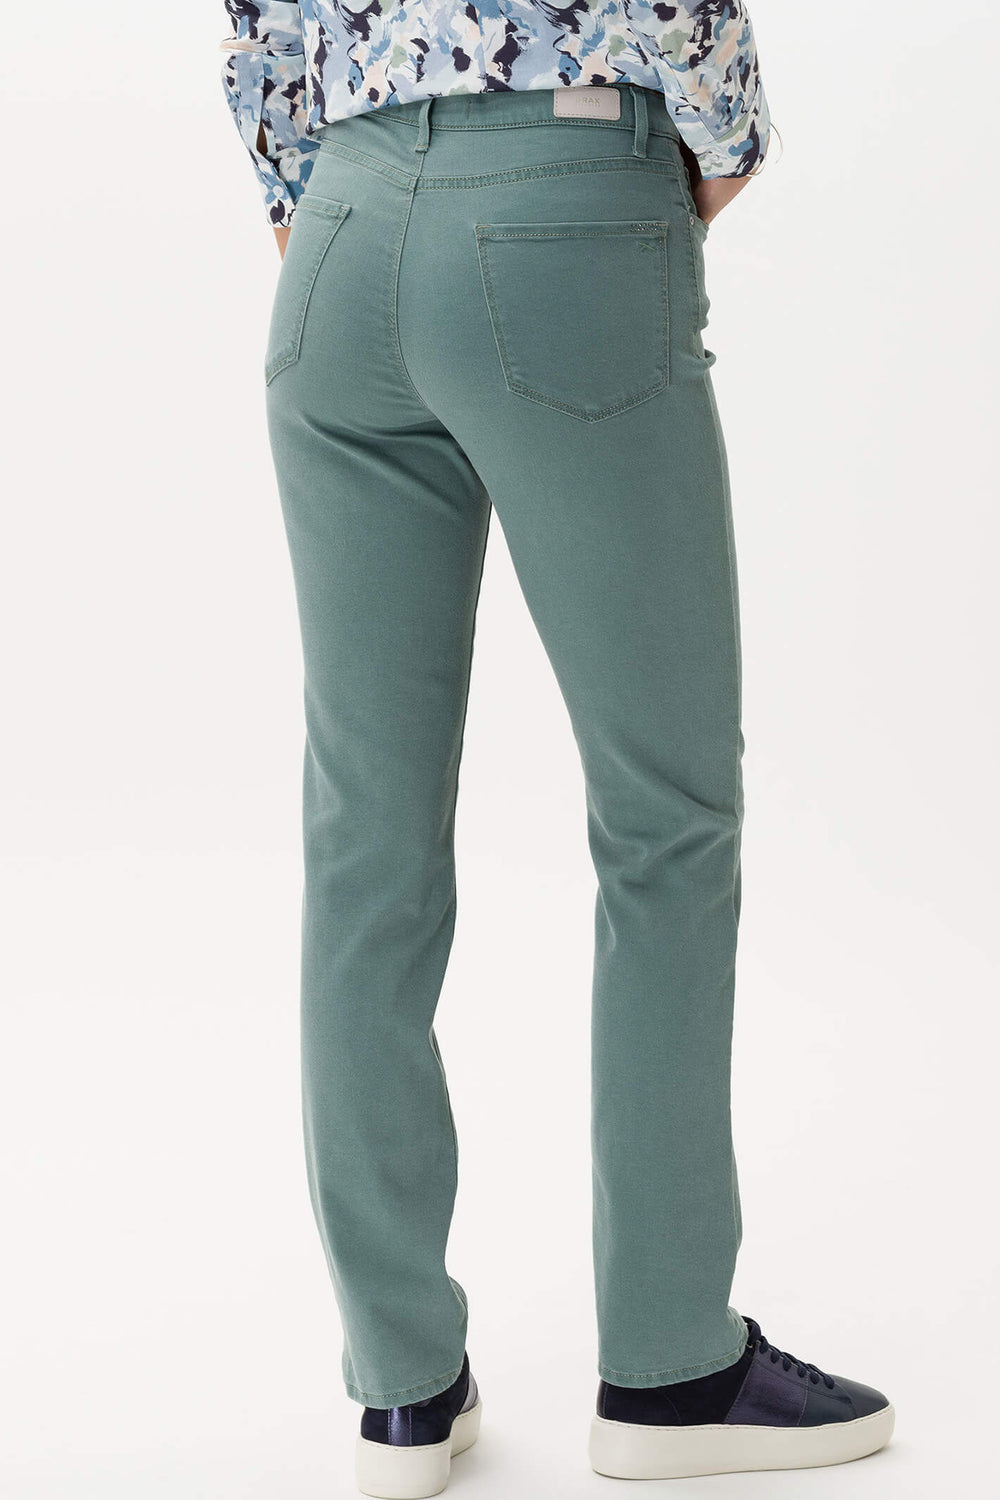 Brax Mary 79-4054 32 Blue Planet Sage Green Slim Fit Jeans - Shirley Allum Boutique